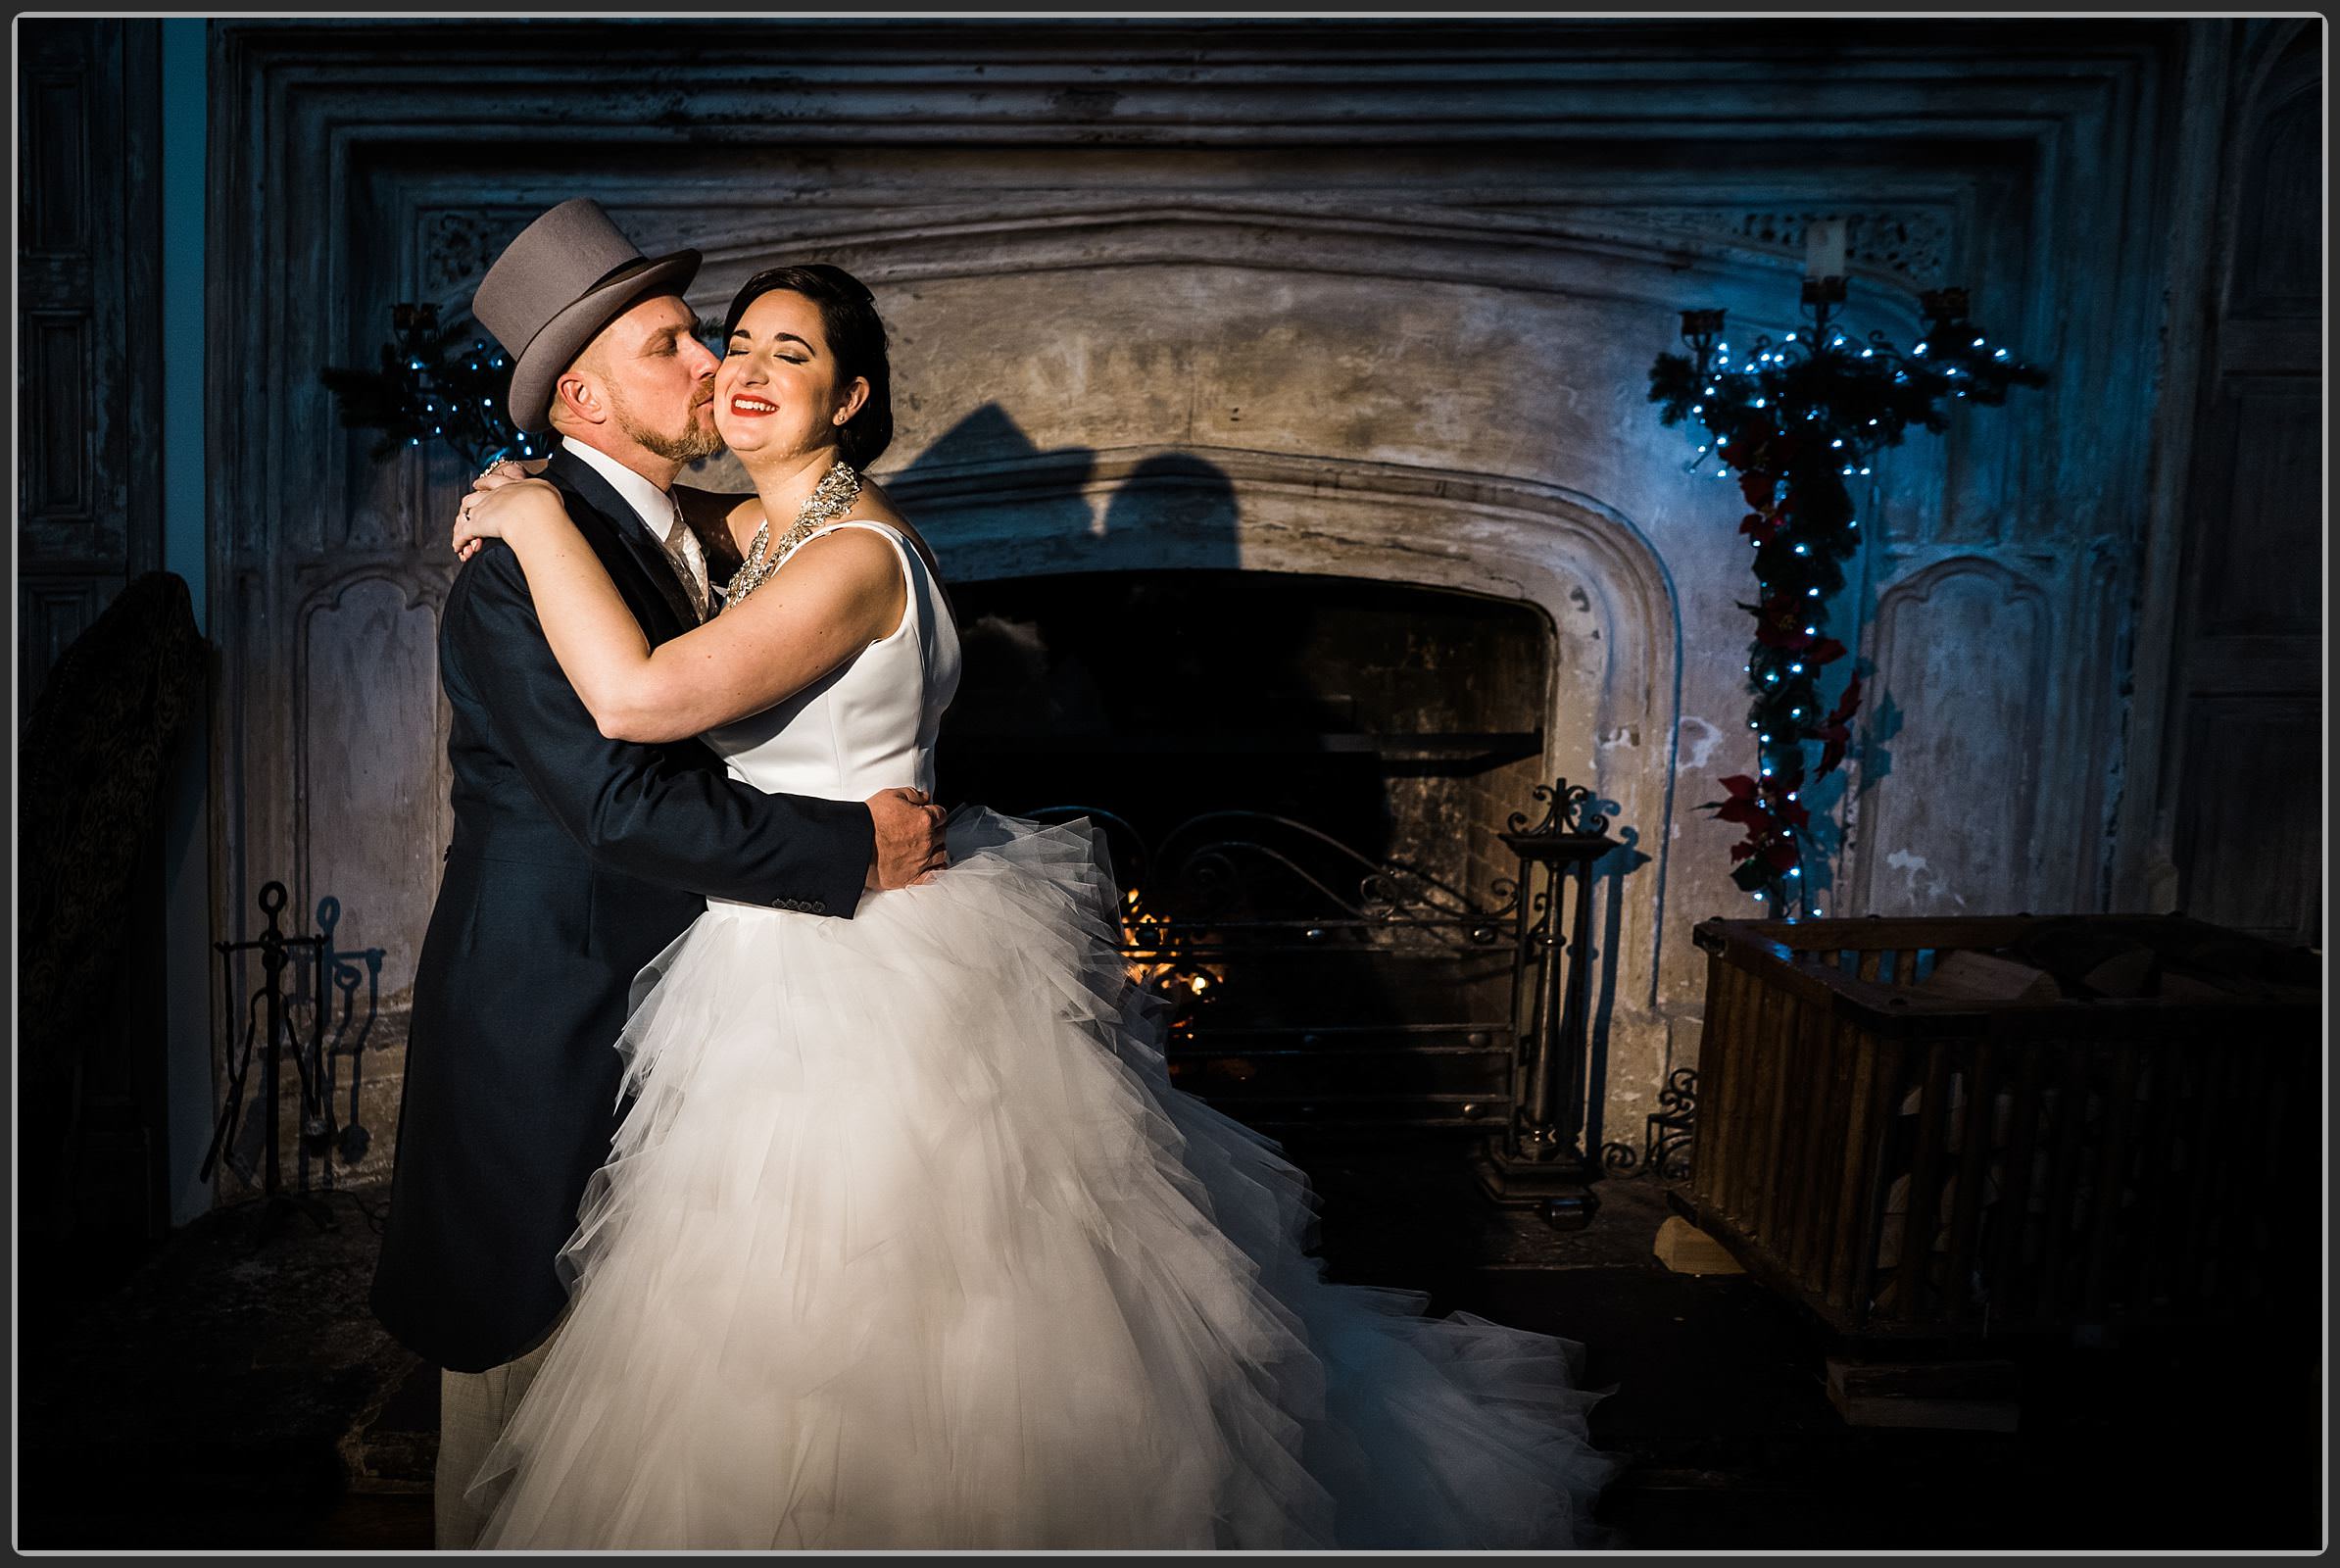 Bride and groom together by the fire place